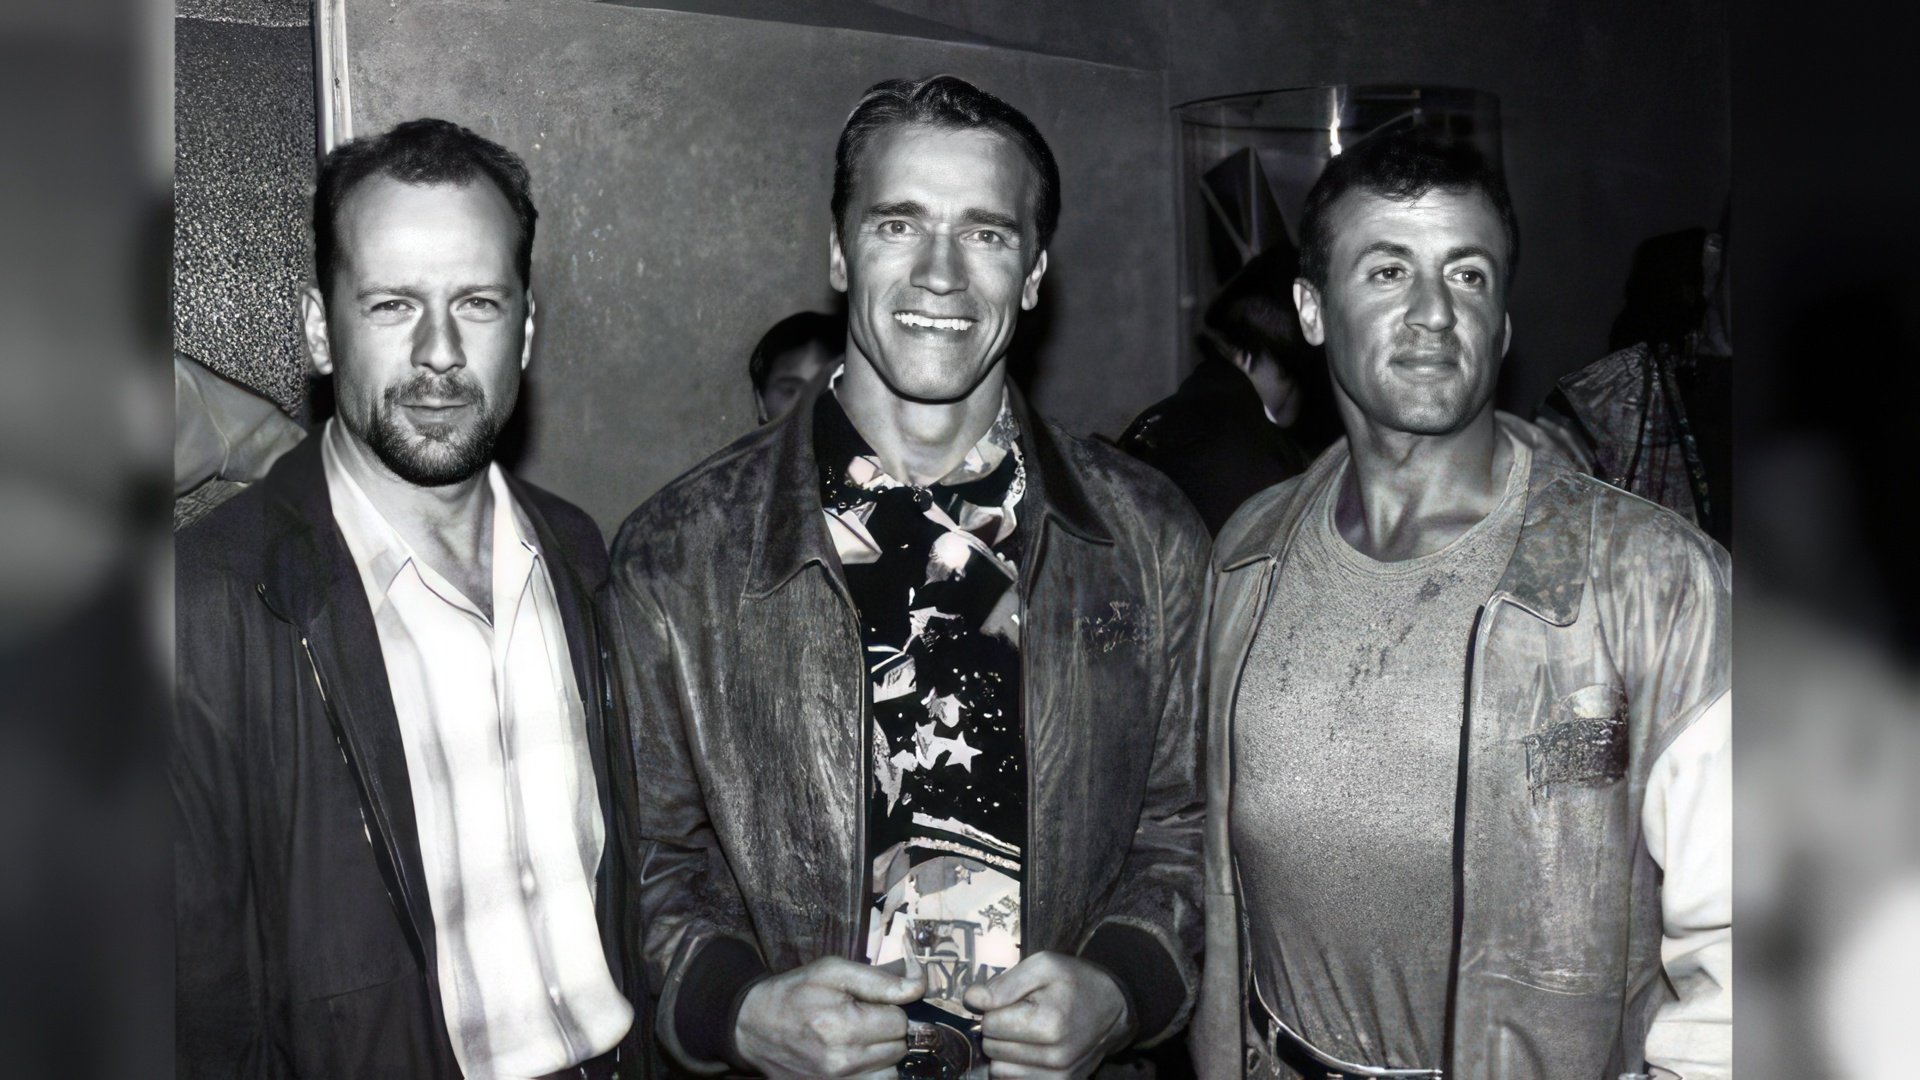 On this picture: Bruce Willis, Arnold Schwarzenegger, and Sylvester Stallone